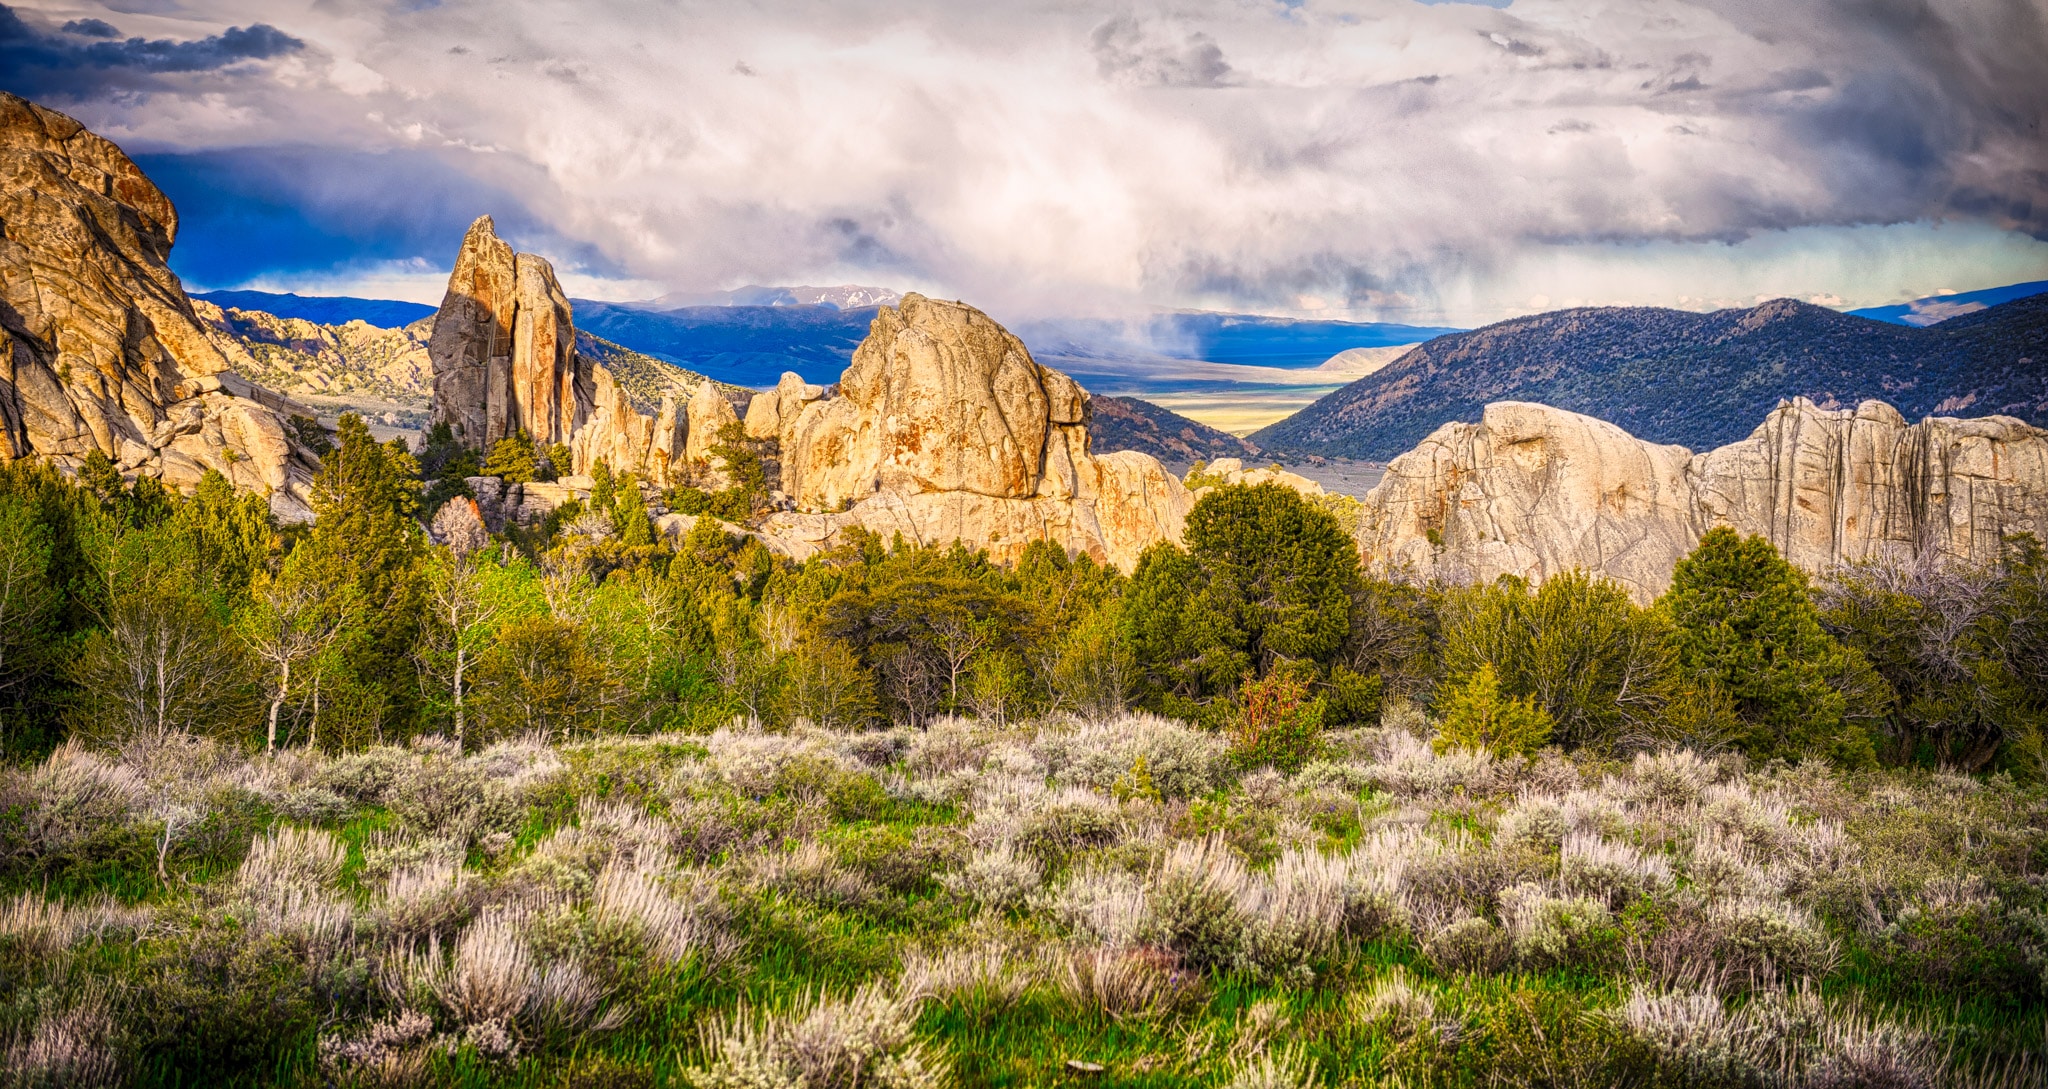 Snow clouds retreat from City of Rocks National Reserve at sunset, near Almo, Idaho.